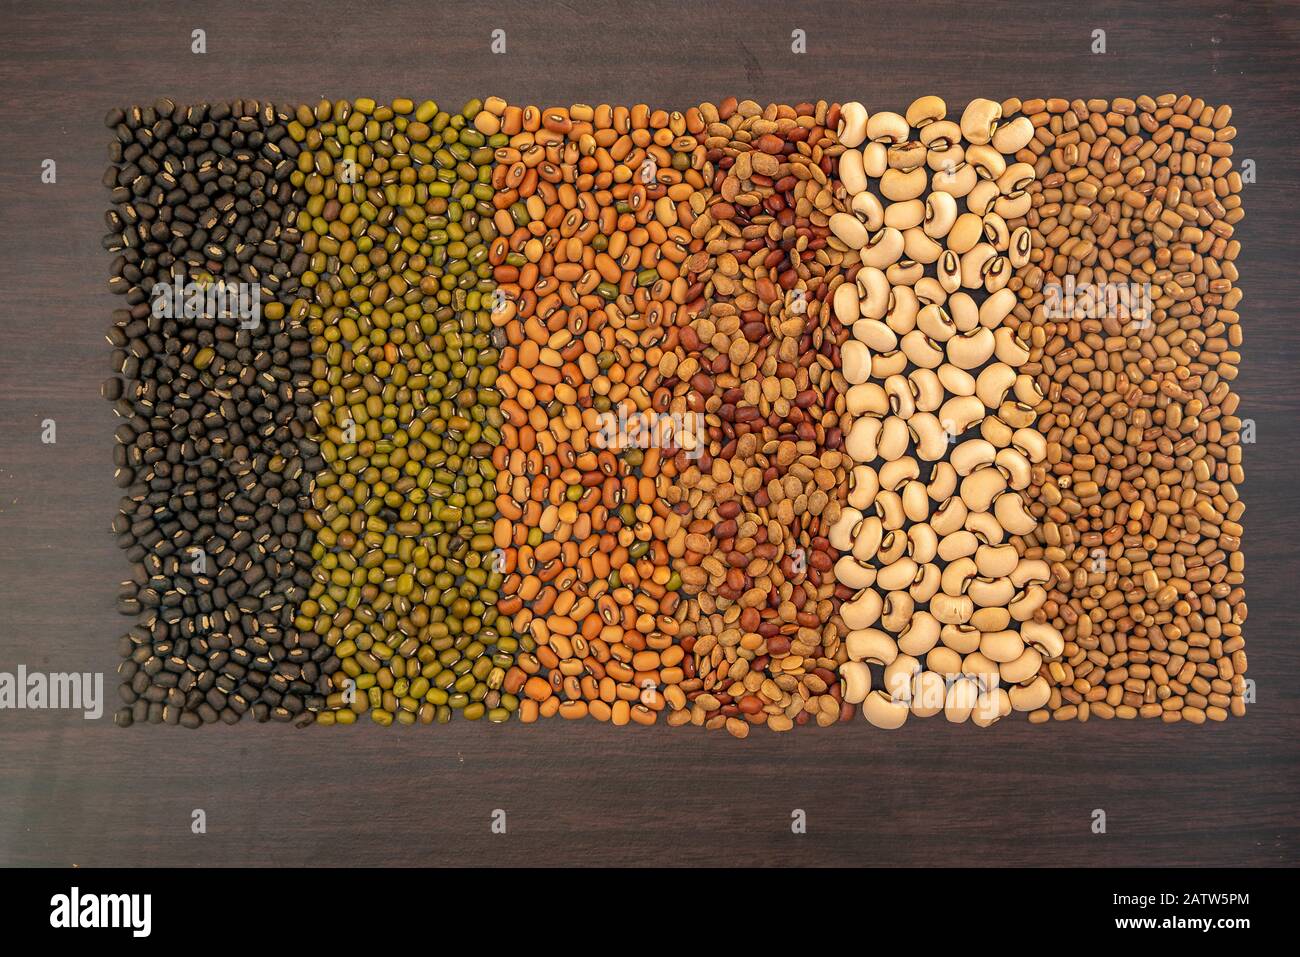 Lentils, Beans, Grams (Lens culinaris or Lens esculenta) are edible legumes. split lentils known as daal are often coooked into thick gravvy. Stock Photo